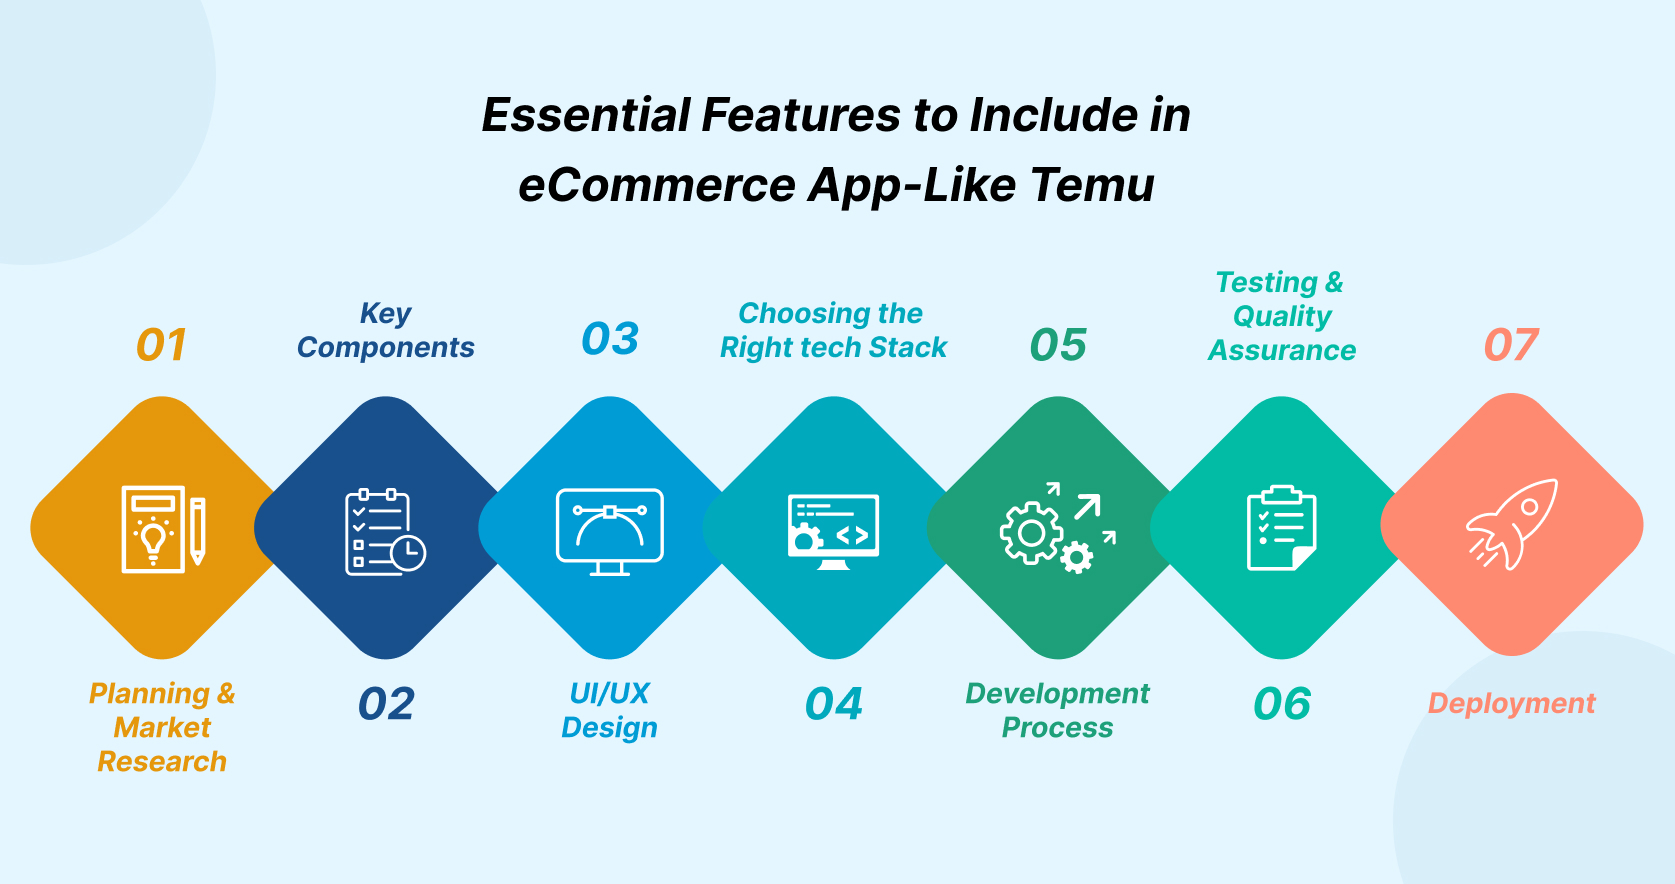 Essential Features to Include in eCommerce App-Like Temu